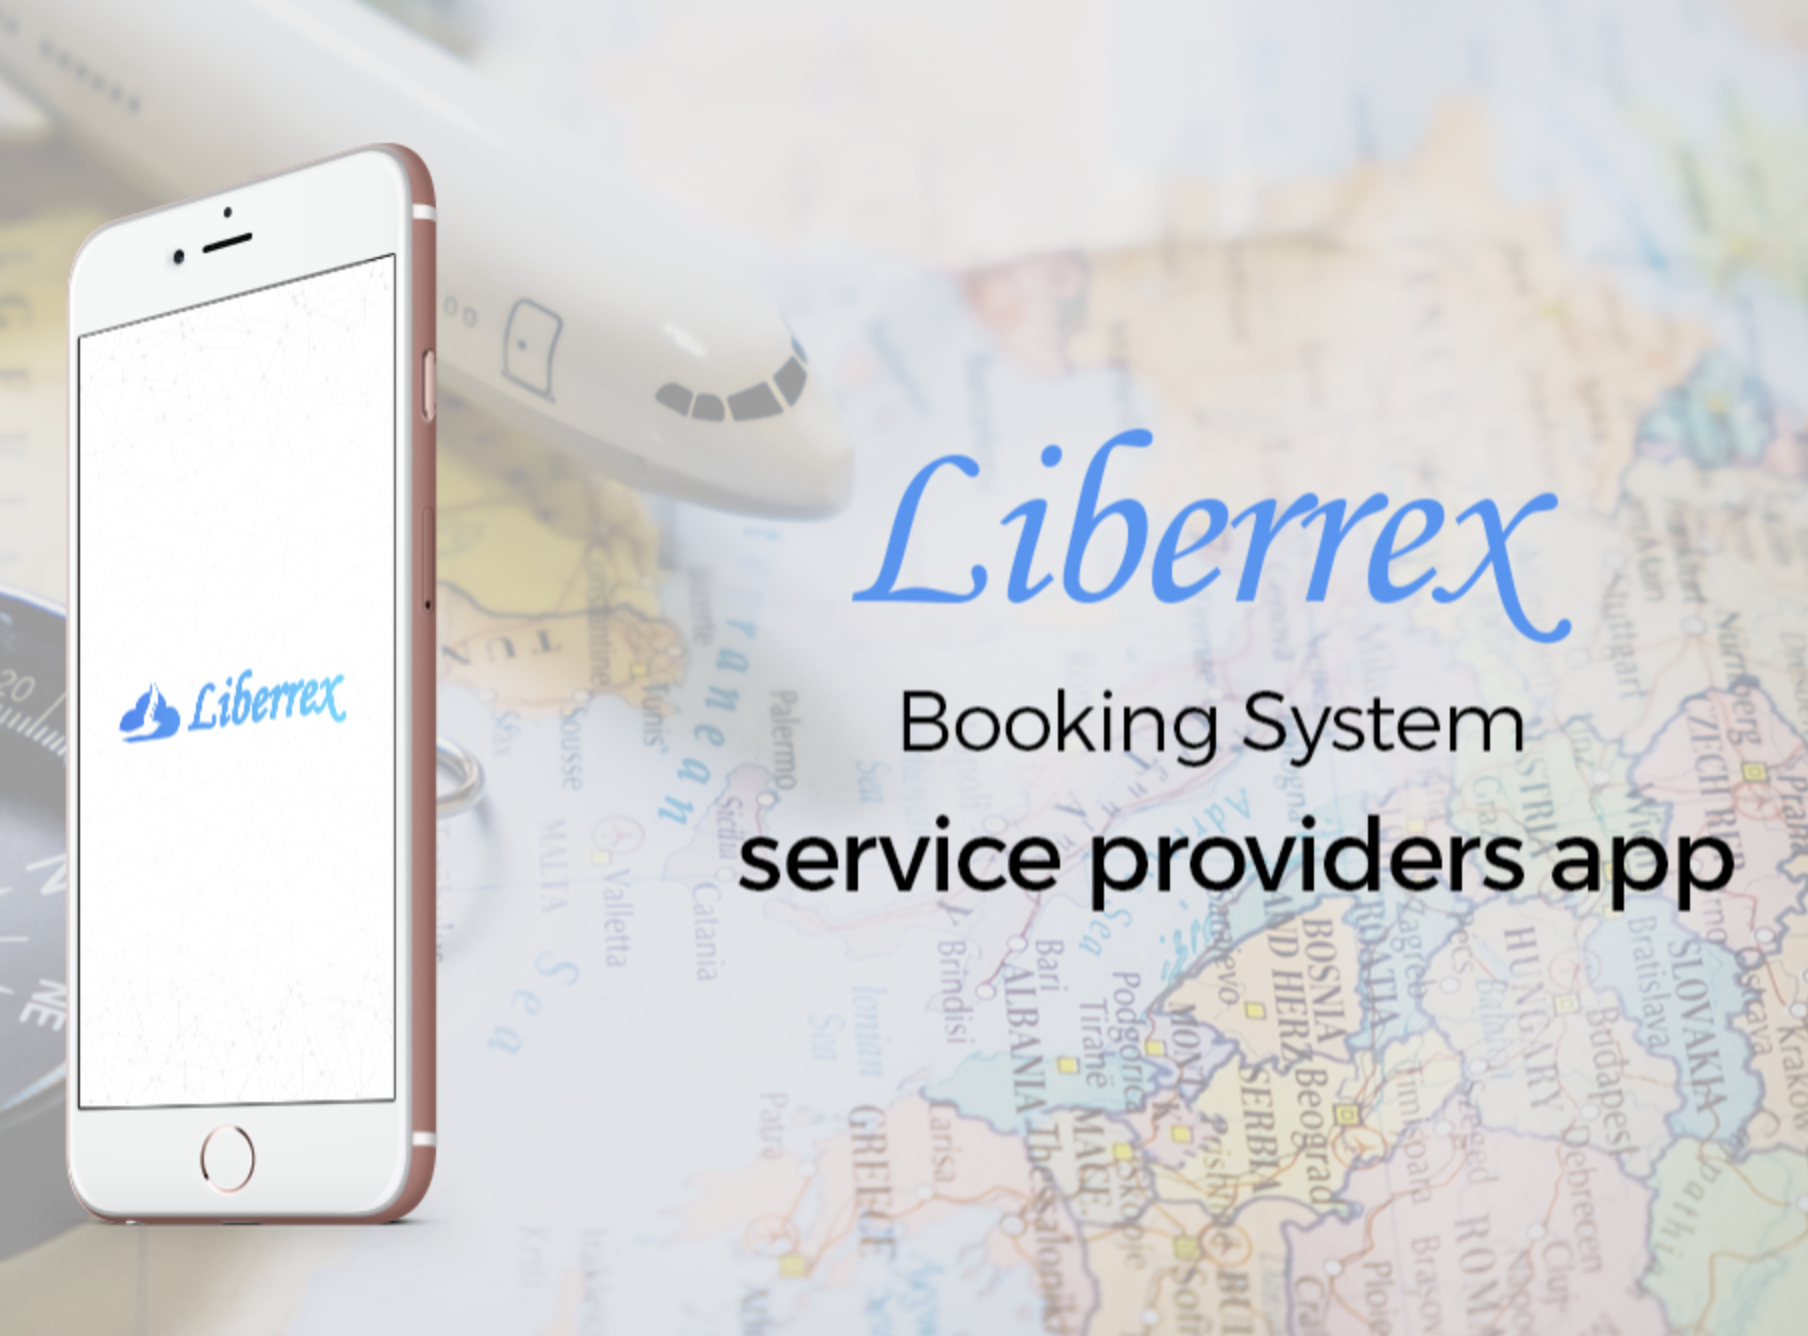 A general queue managing system that allows services to be booked remotely.